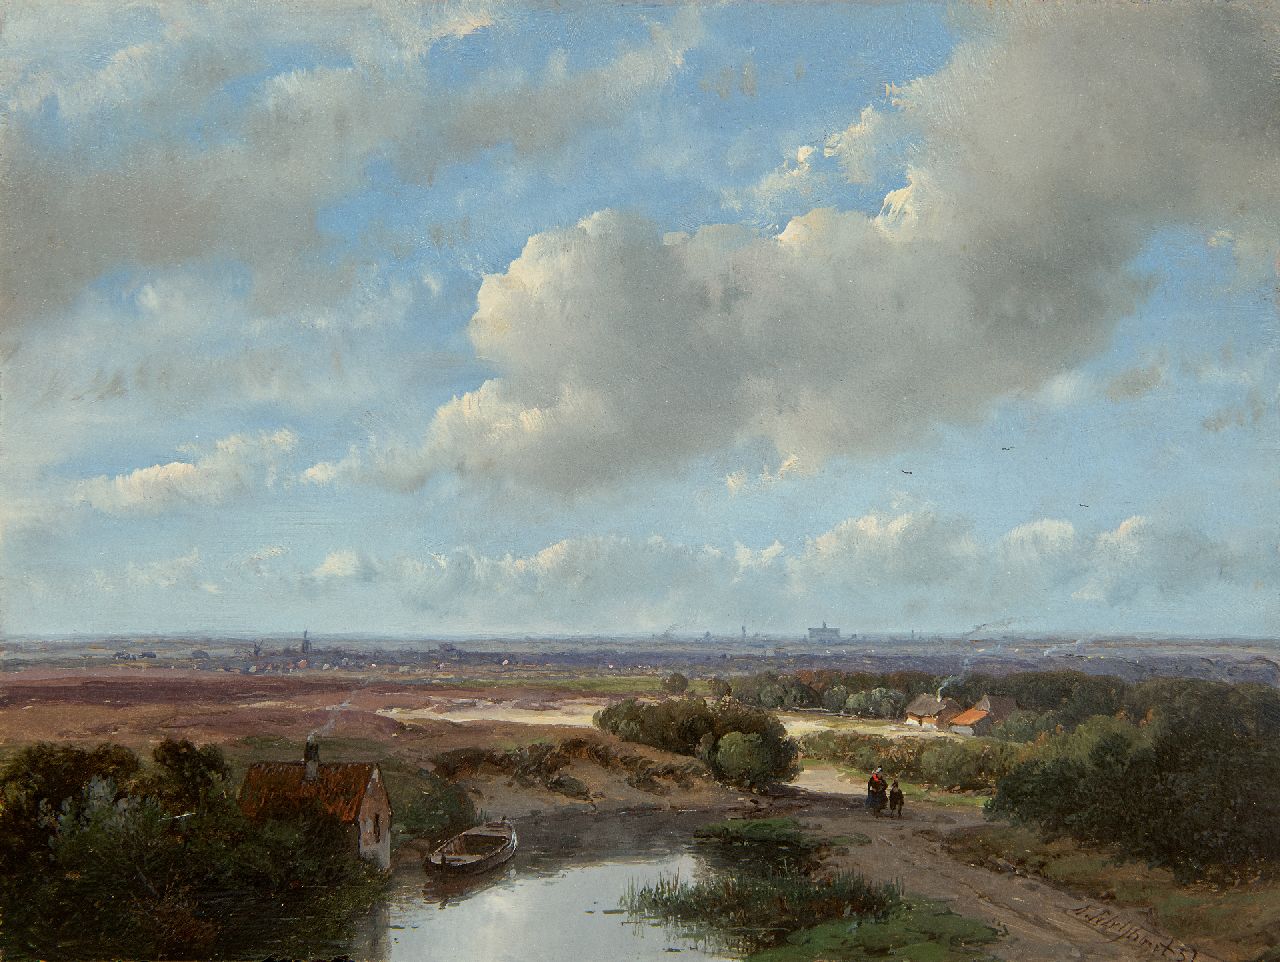 Schelfhout A.  | Andreas Schelfhout, Panoramic landscape with the St. Bavokerk of Haarlem and a steam train on the horizon, oil on panel 17.3 x 22.9 cm, signed l.r. and dated '57